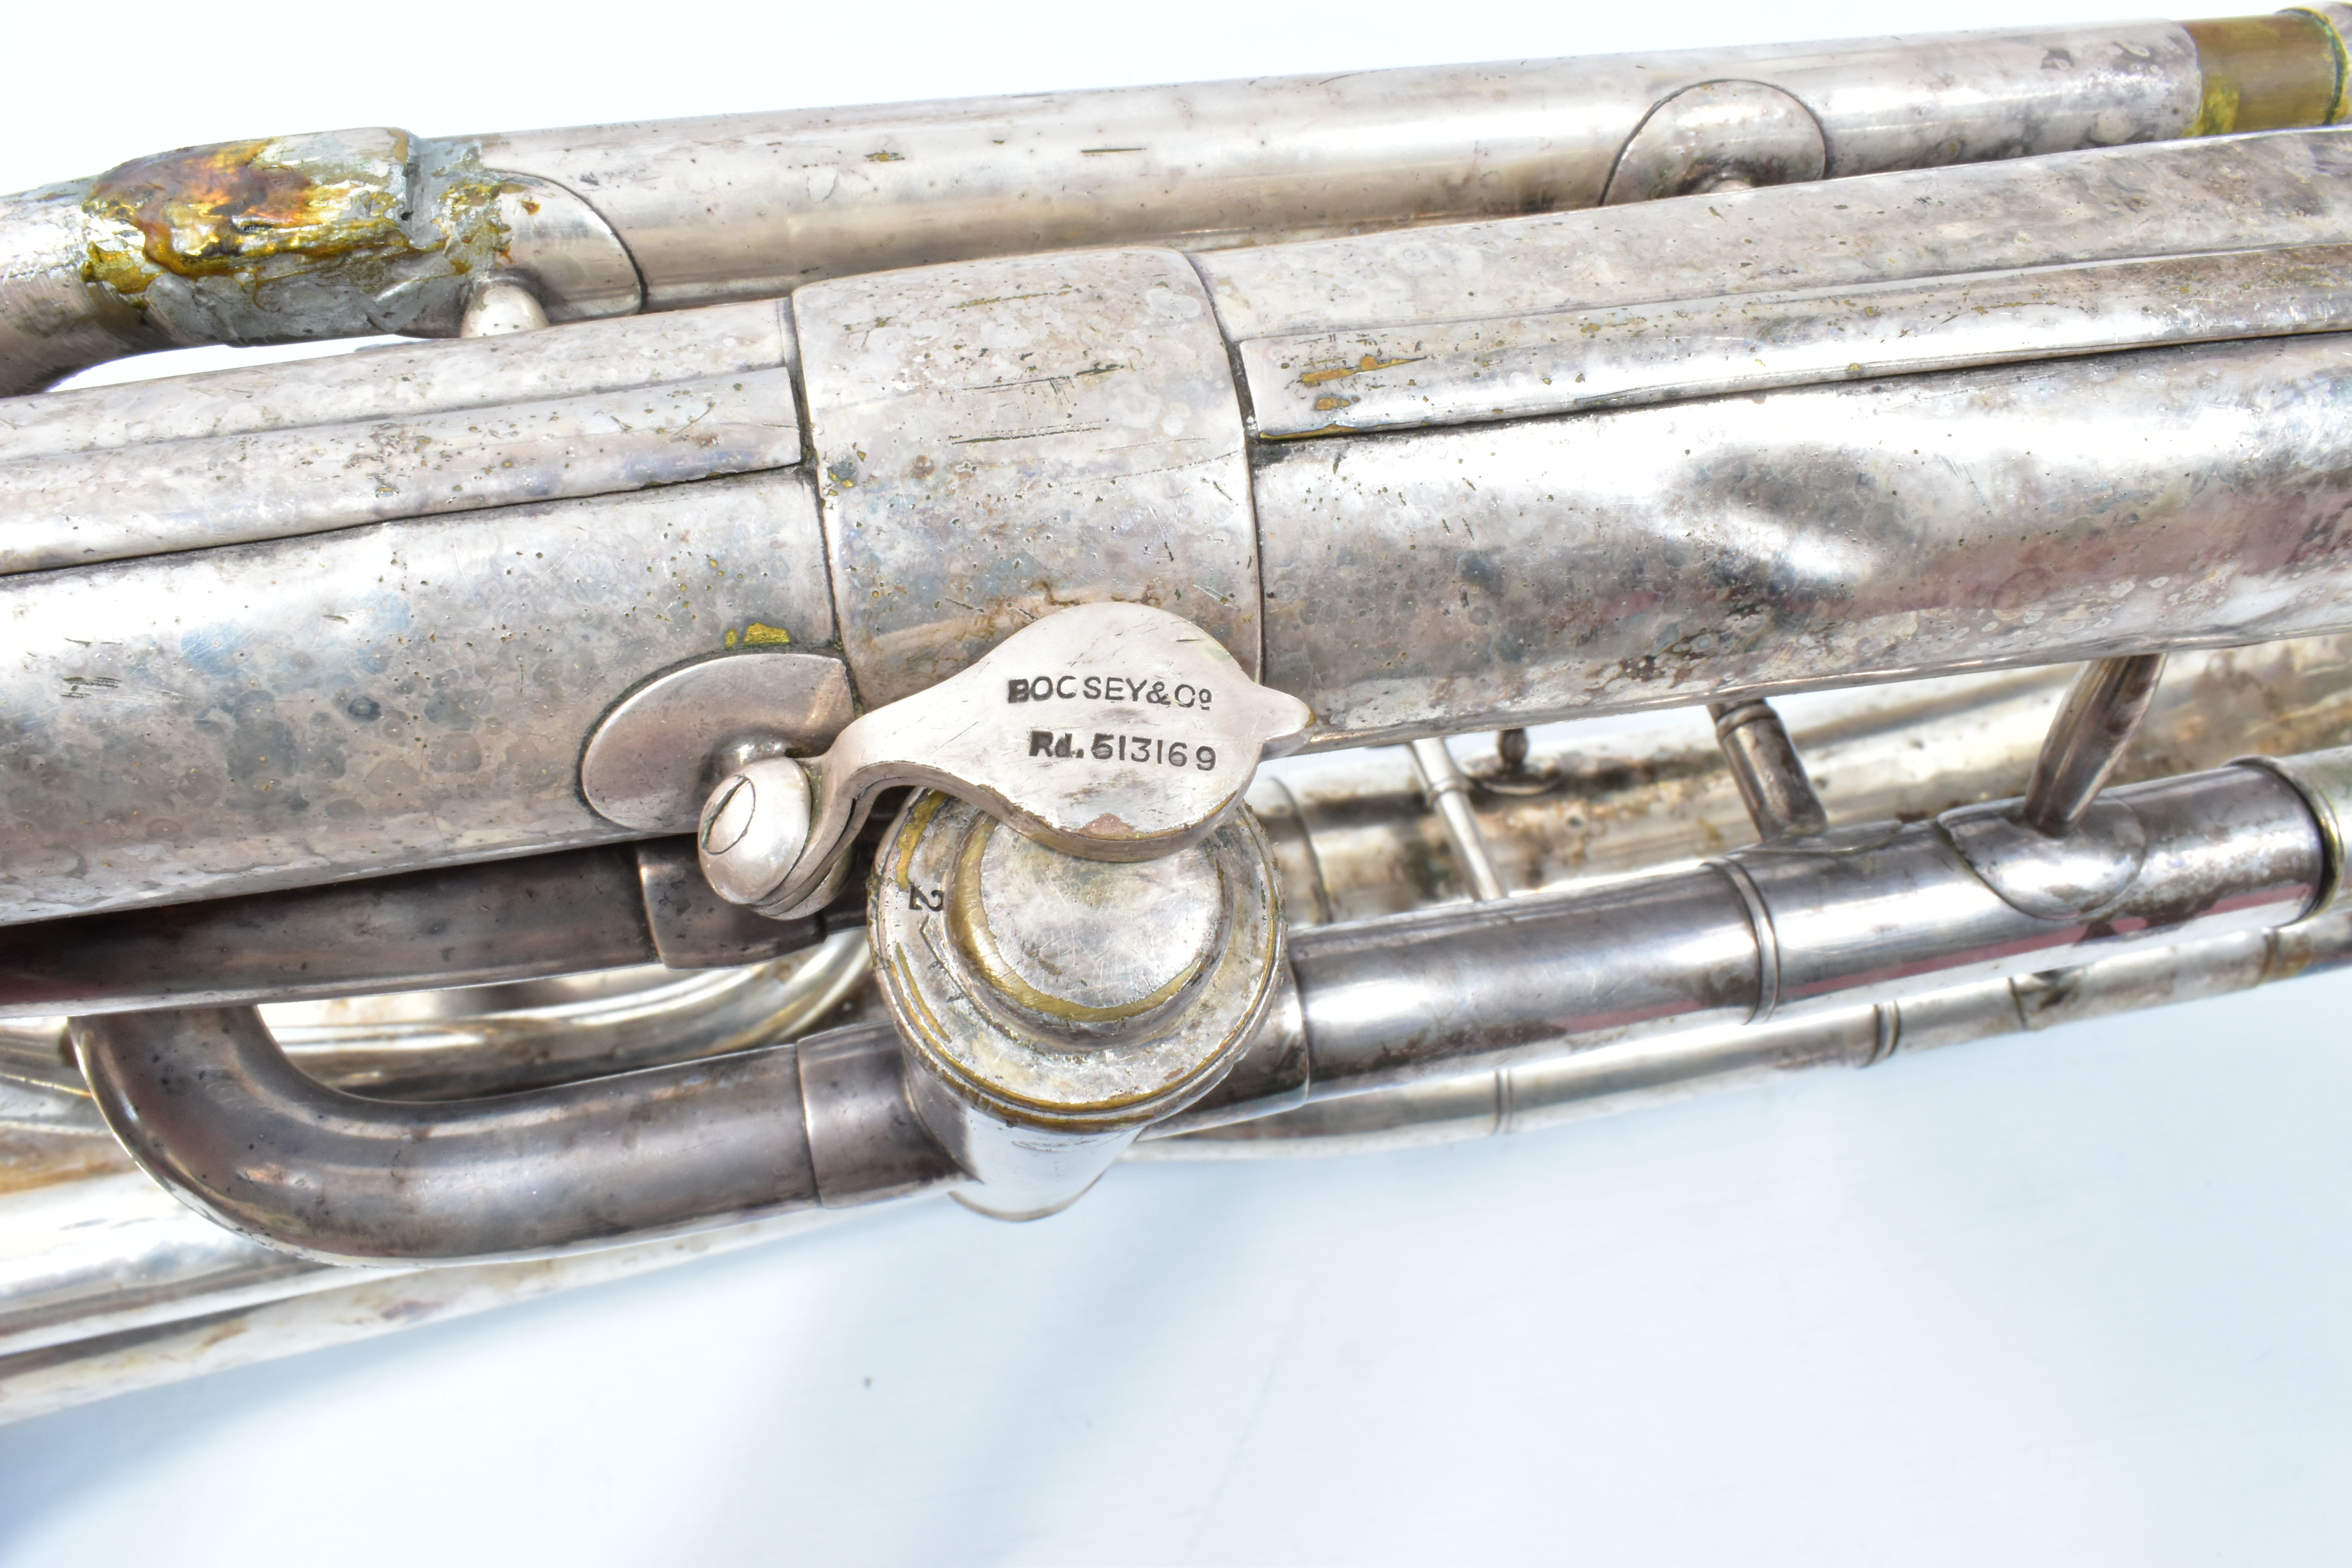 A BESSON AND CO EUPHONIUM stamped Class A Zephyr, Prototype on the bell and 113225 on the valves and - Image 2 of 5